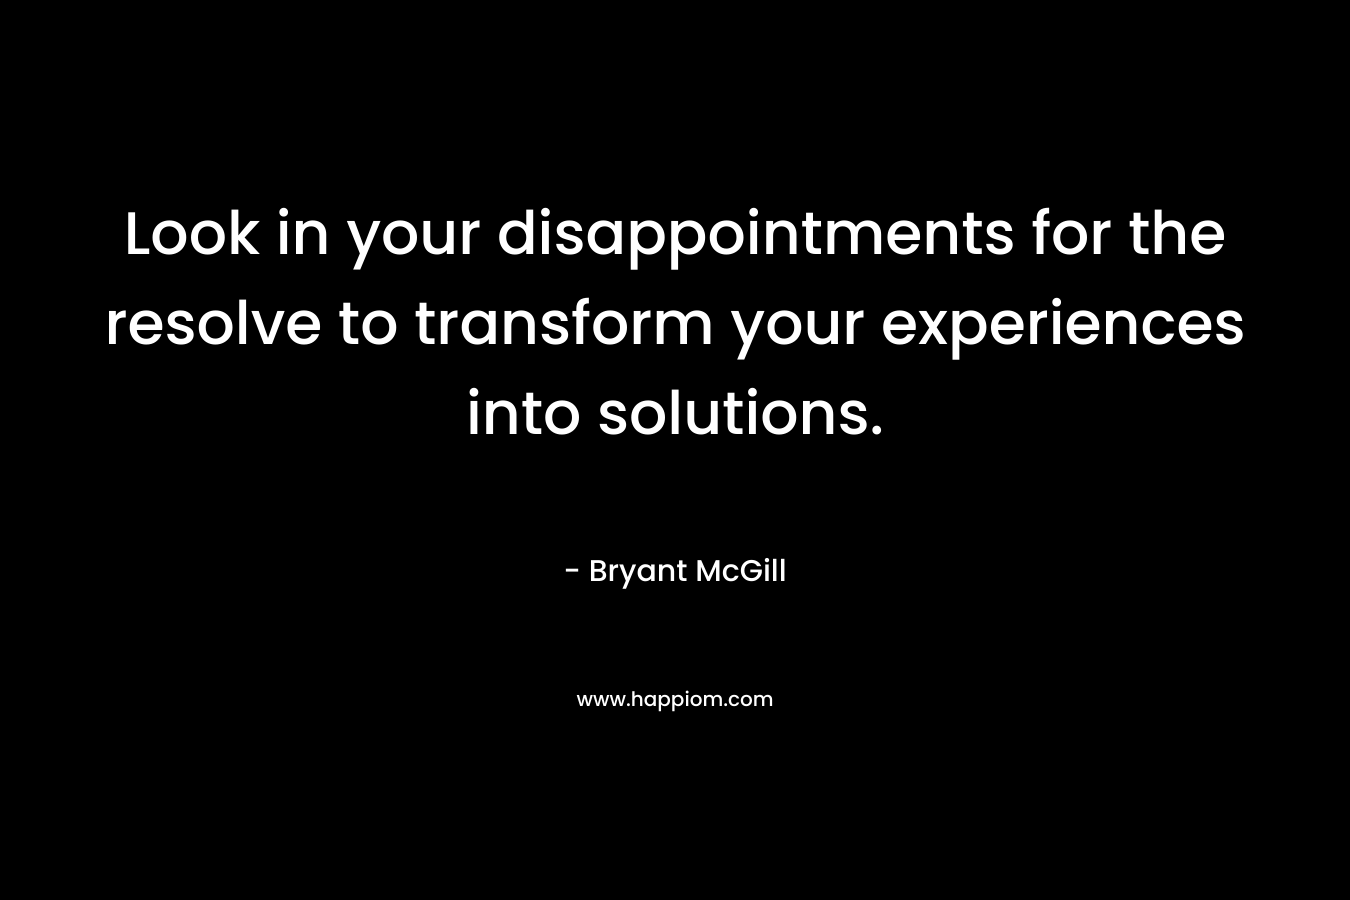 Look in your disappointments for the resolve to transform your experiences into solutions. – Bryant McGill